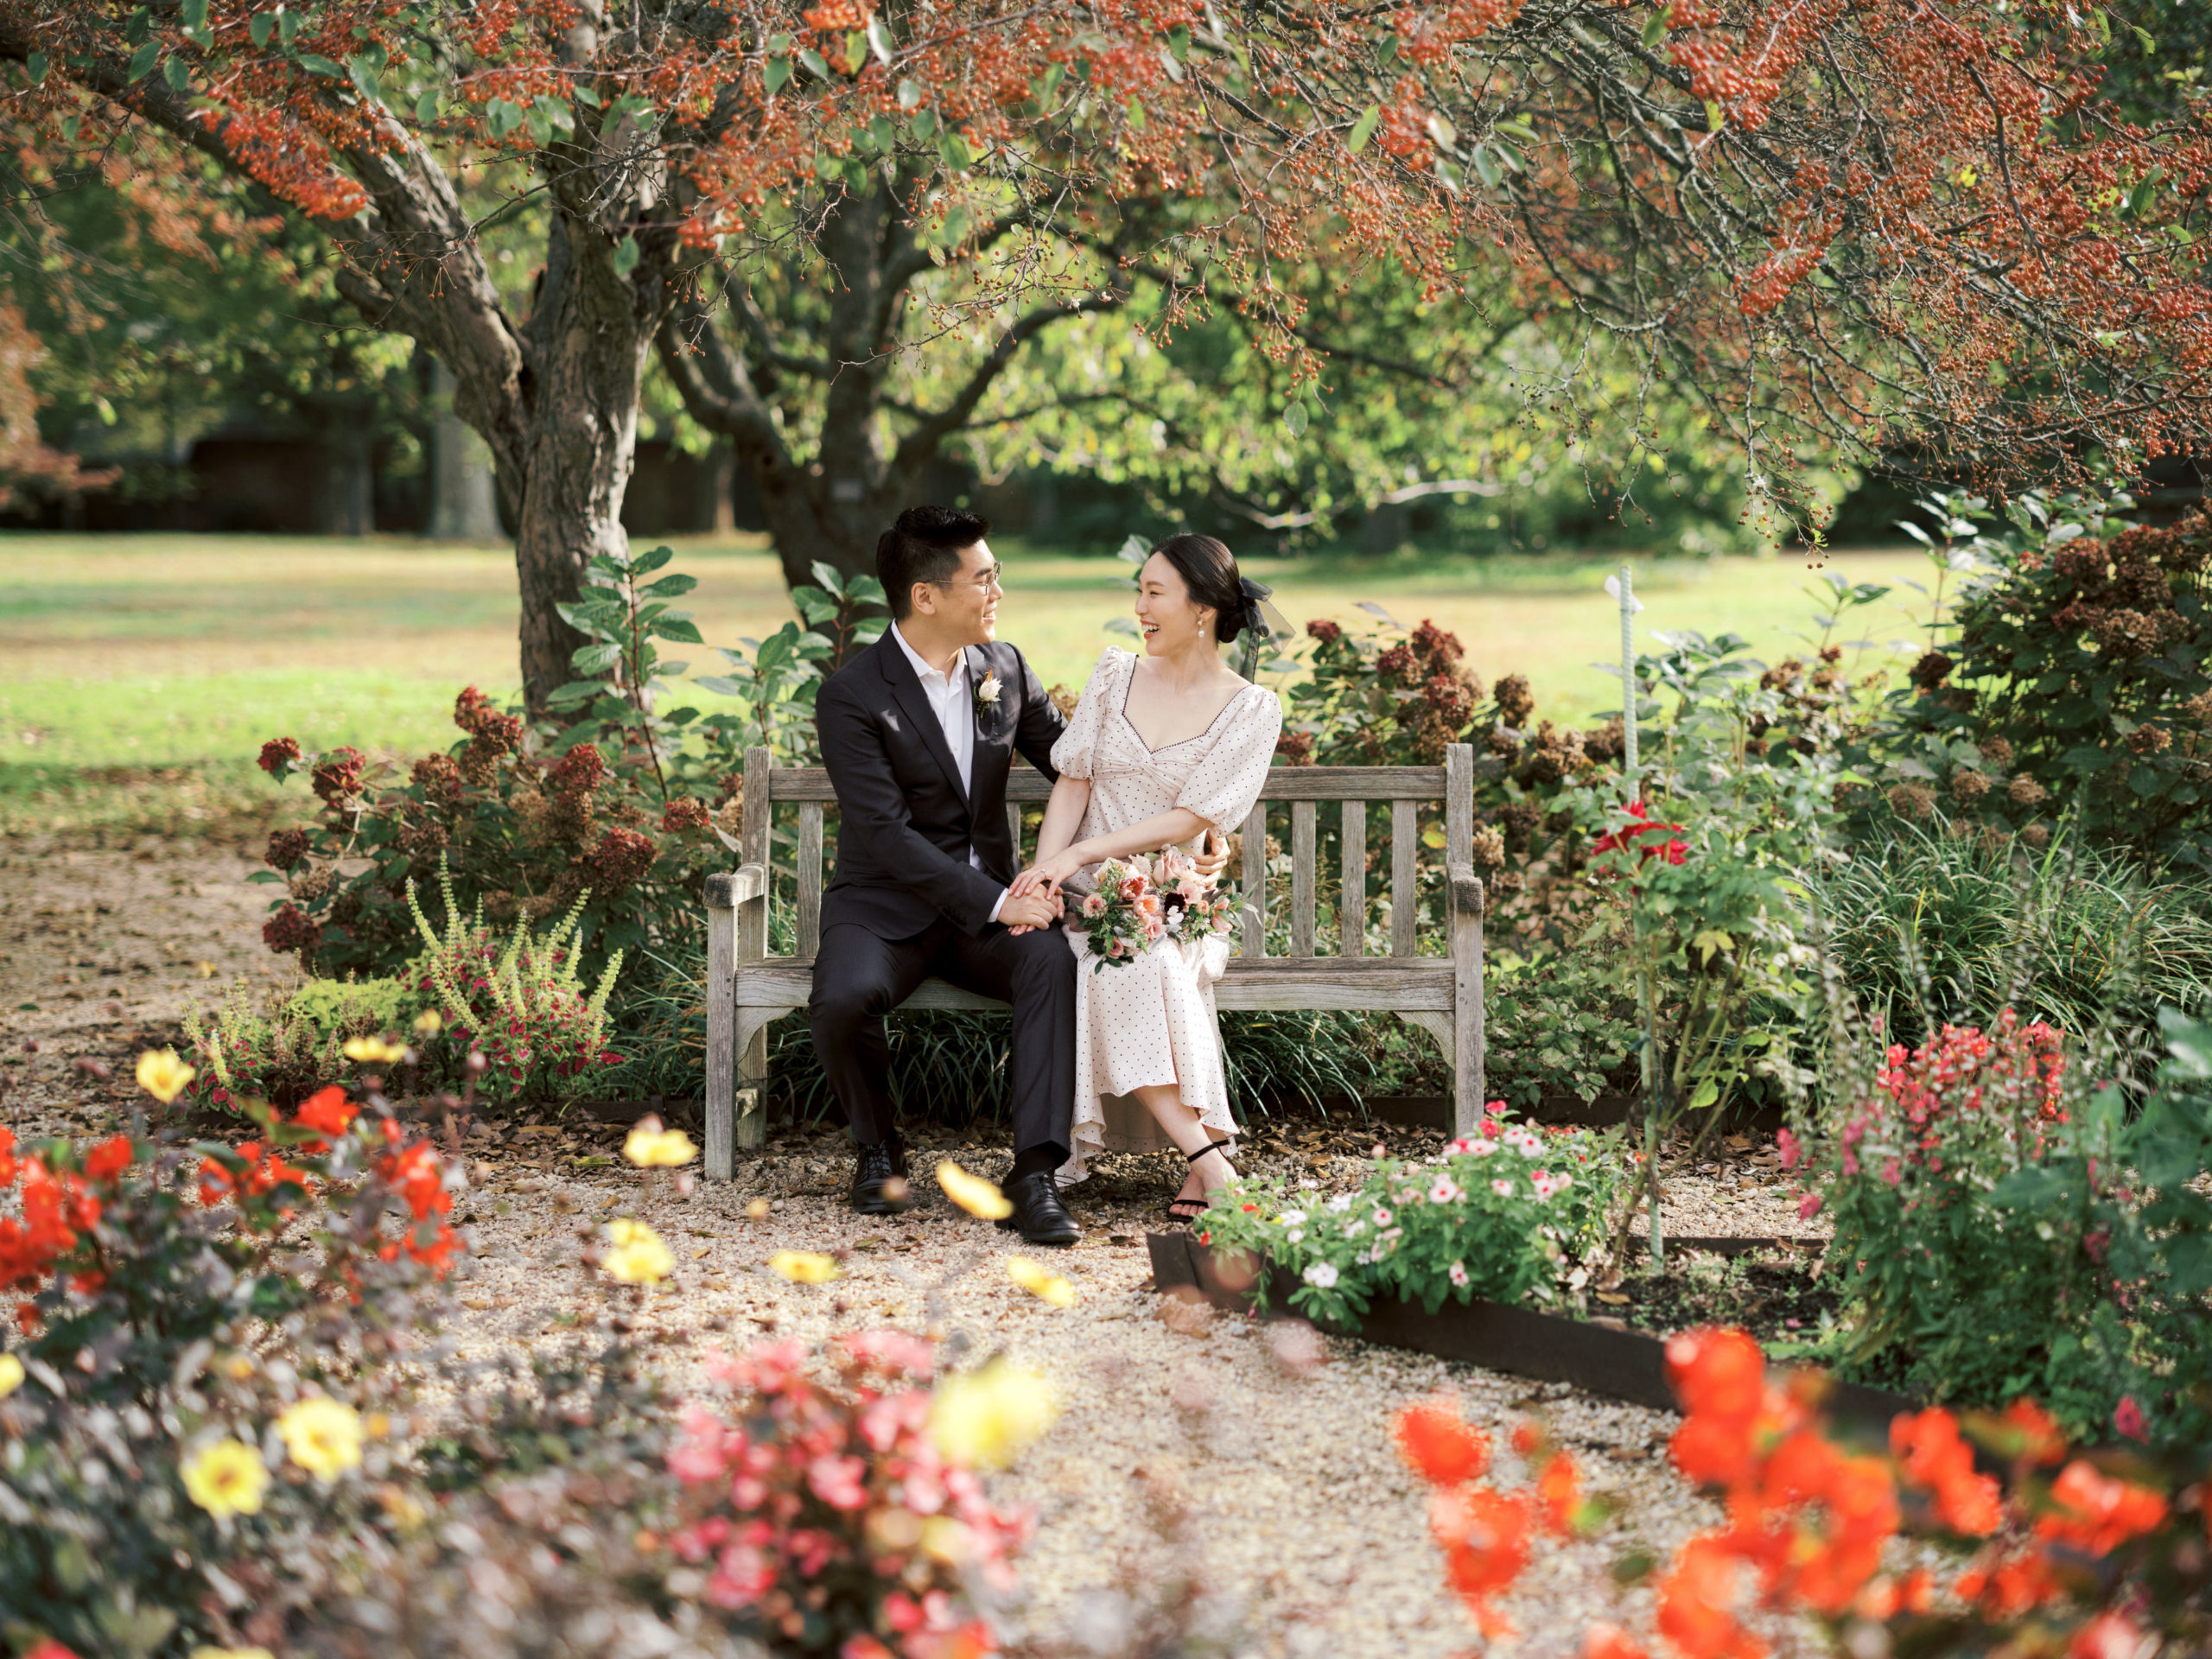 The engaged couple are having a good time, sitting at a bench, surrounded by beautiful flowers and tree. Engagement session photo by Jenny Fu Studio